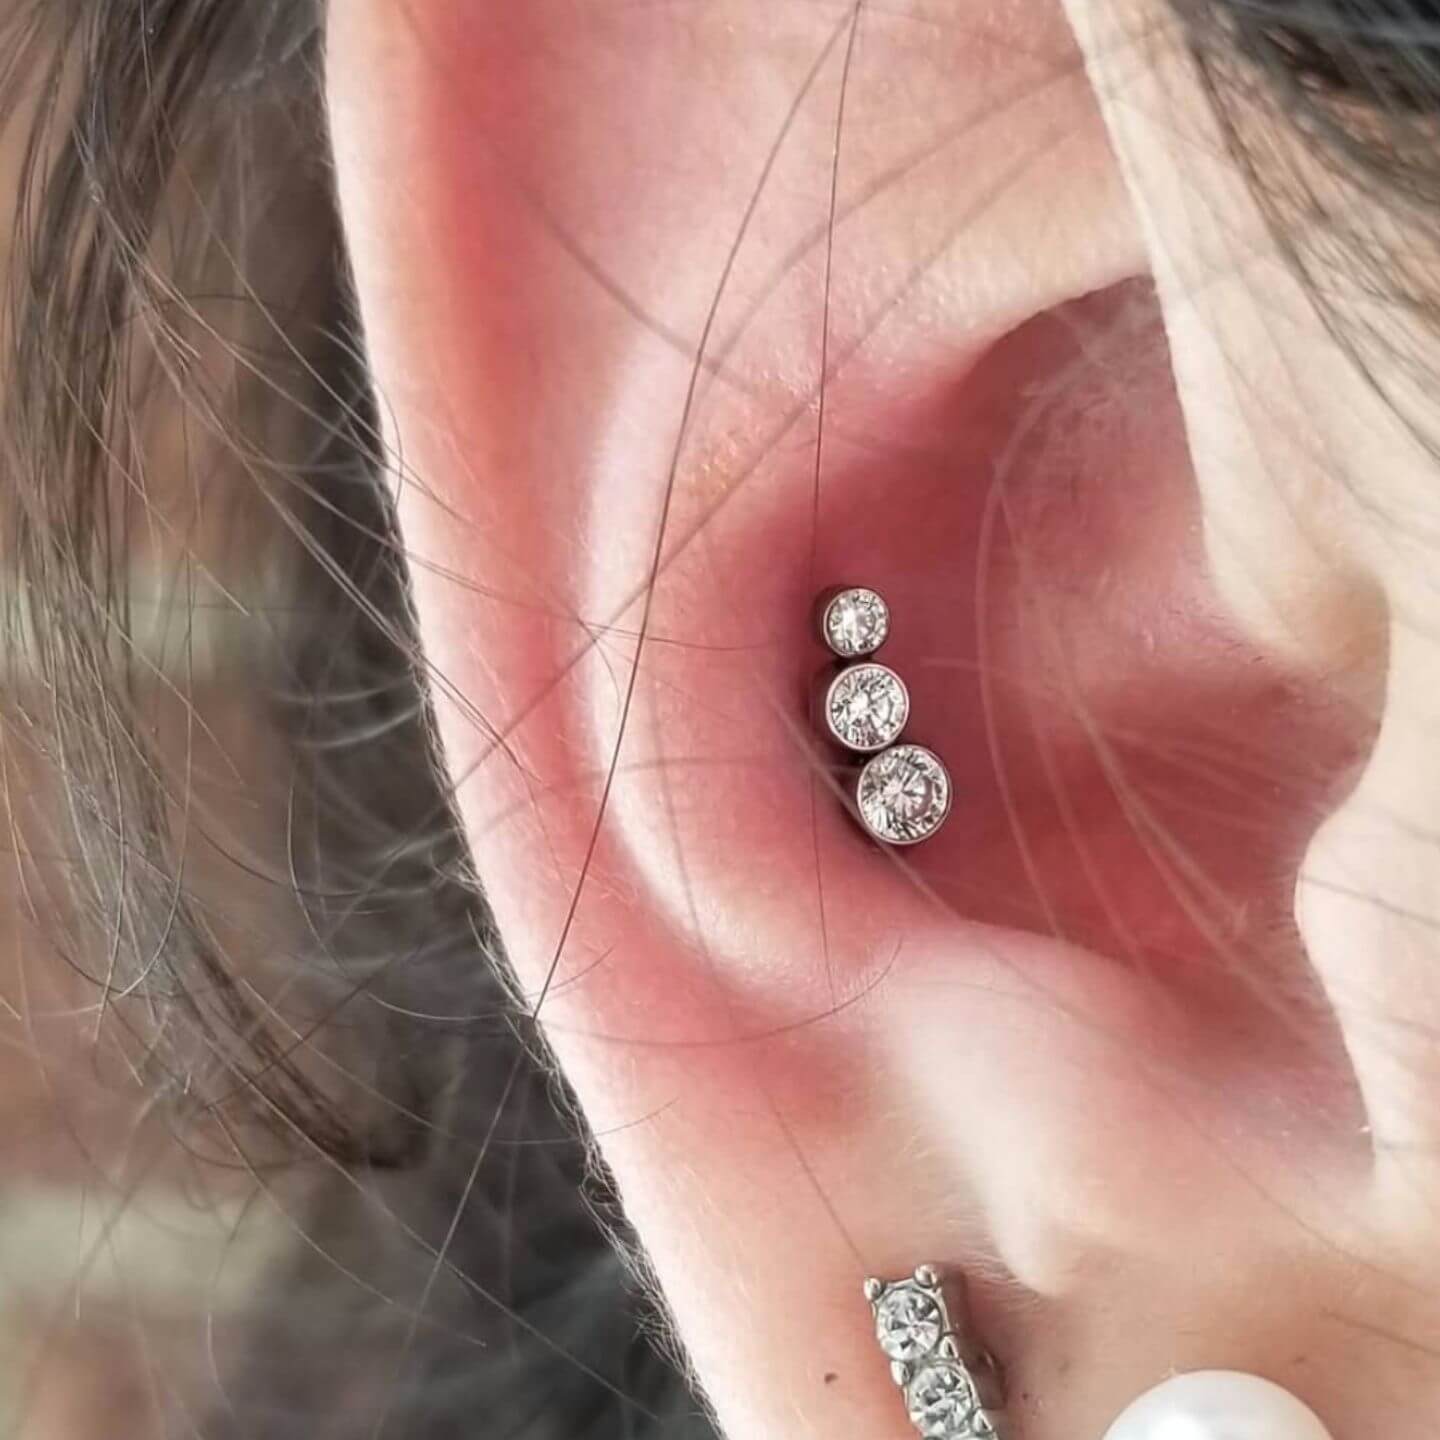 Your Ultimate Ear Piercings Guide and Care Tips for 2022